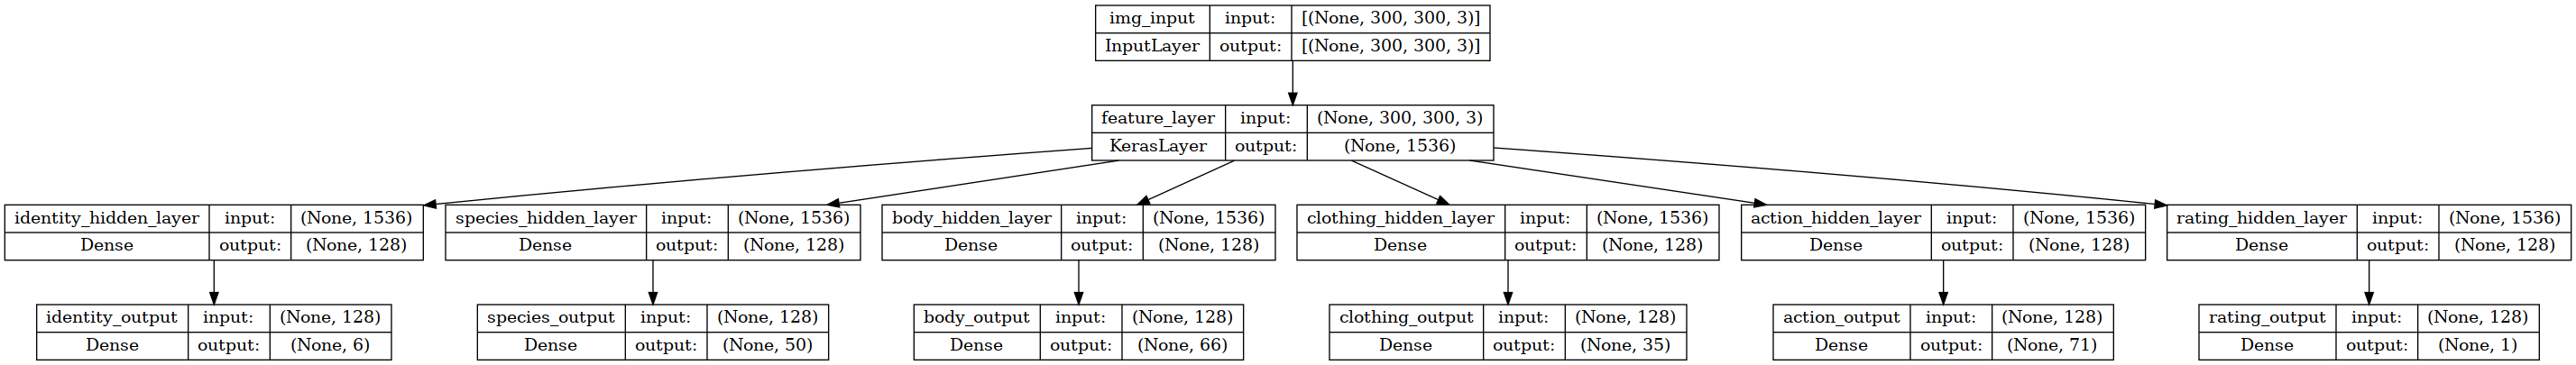 Image of model's architecture. Starts with an Input layer